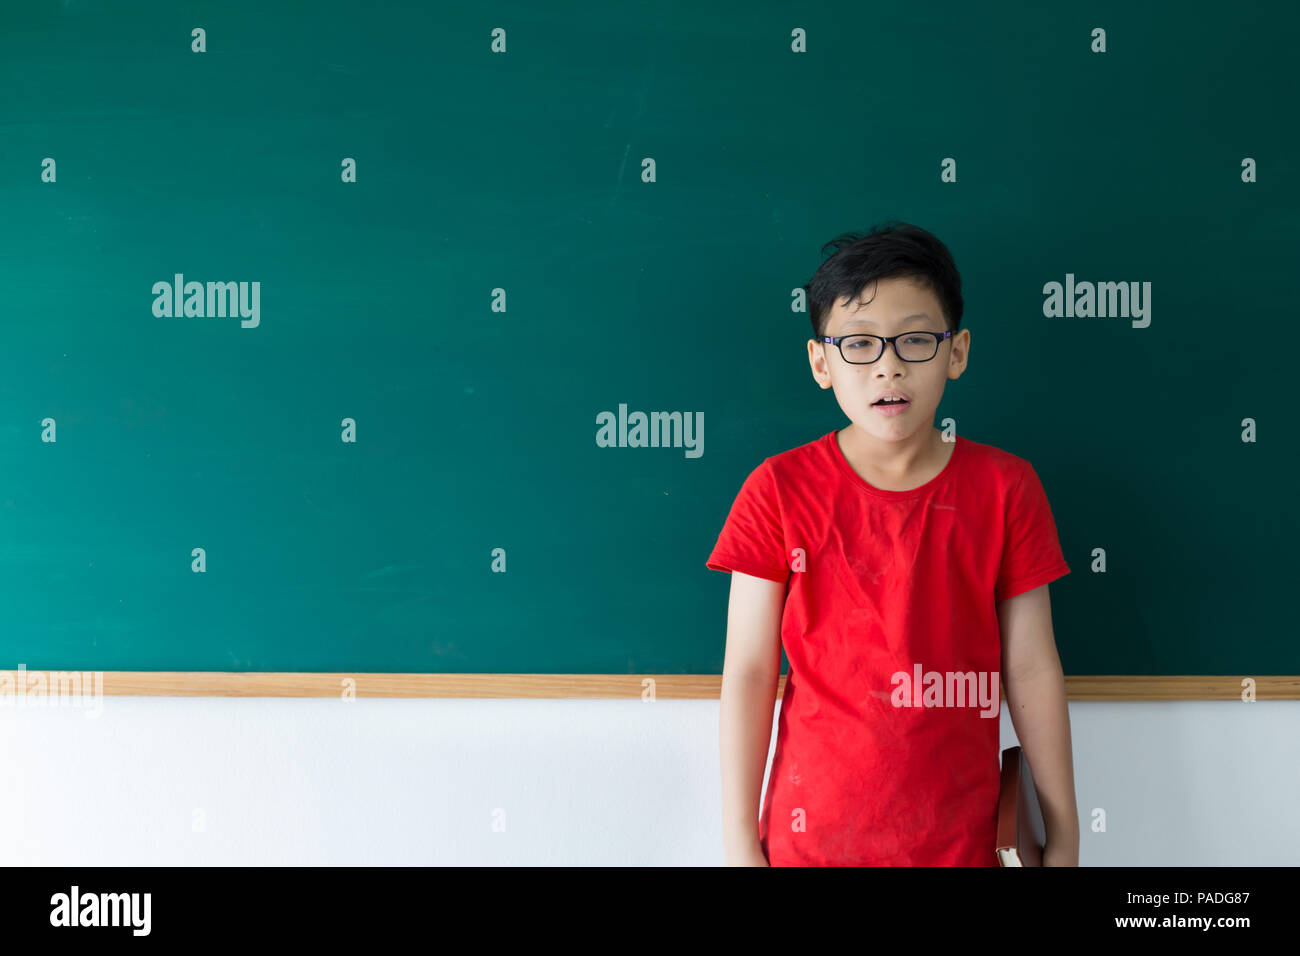 Children boy make nerd face and standingg on chalkboard in classroom at school Stock Photo